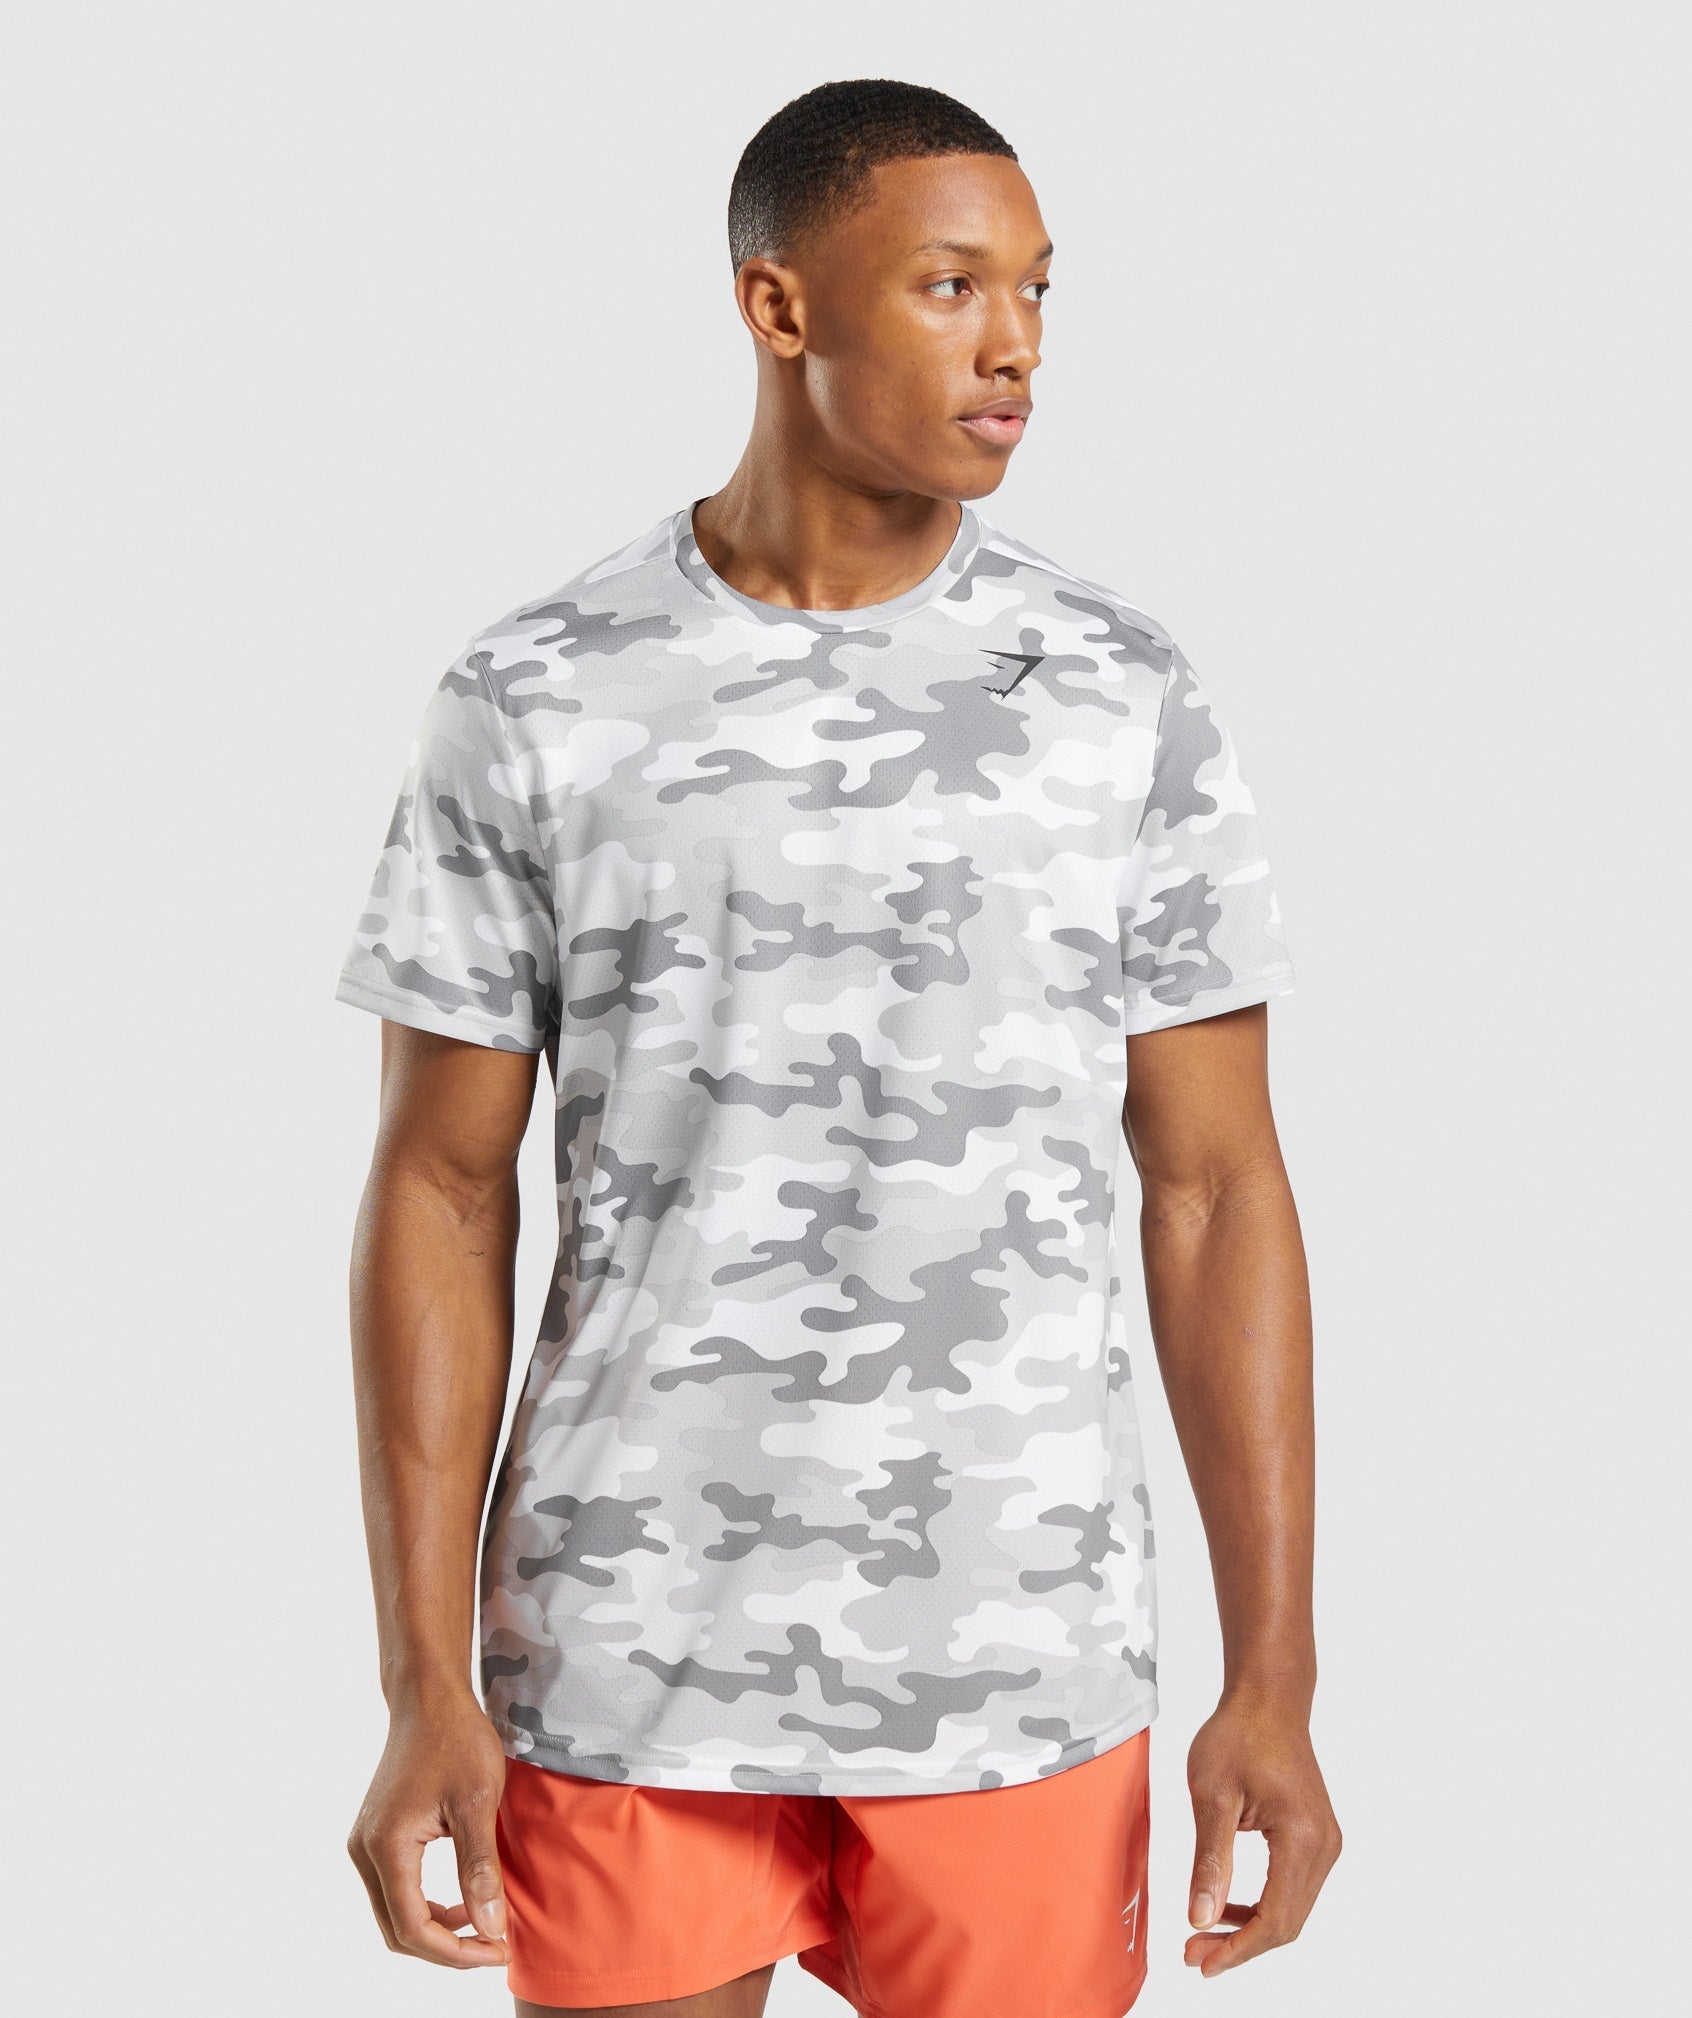 Arrival T-Shirt in Light Grey Print - view 1